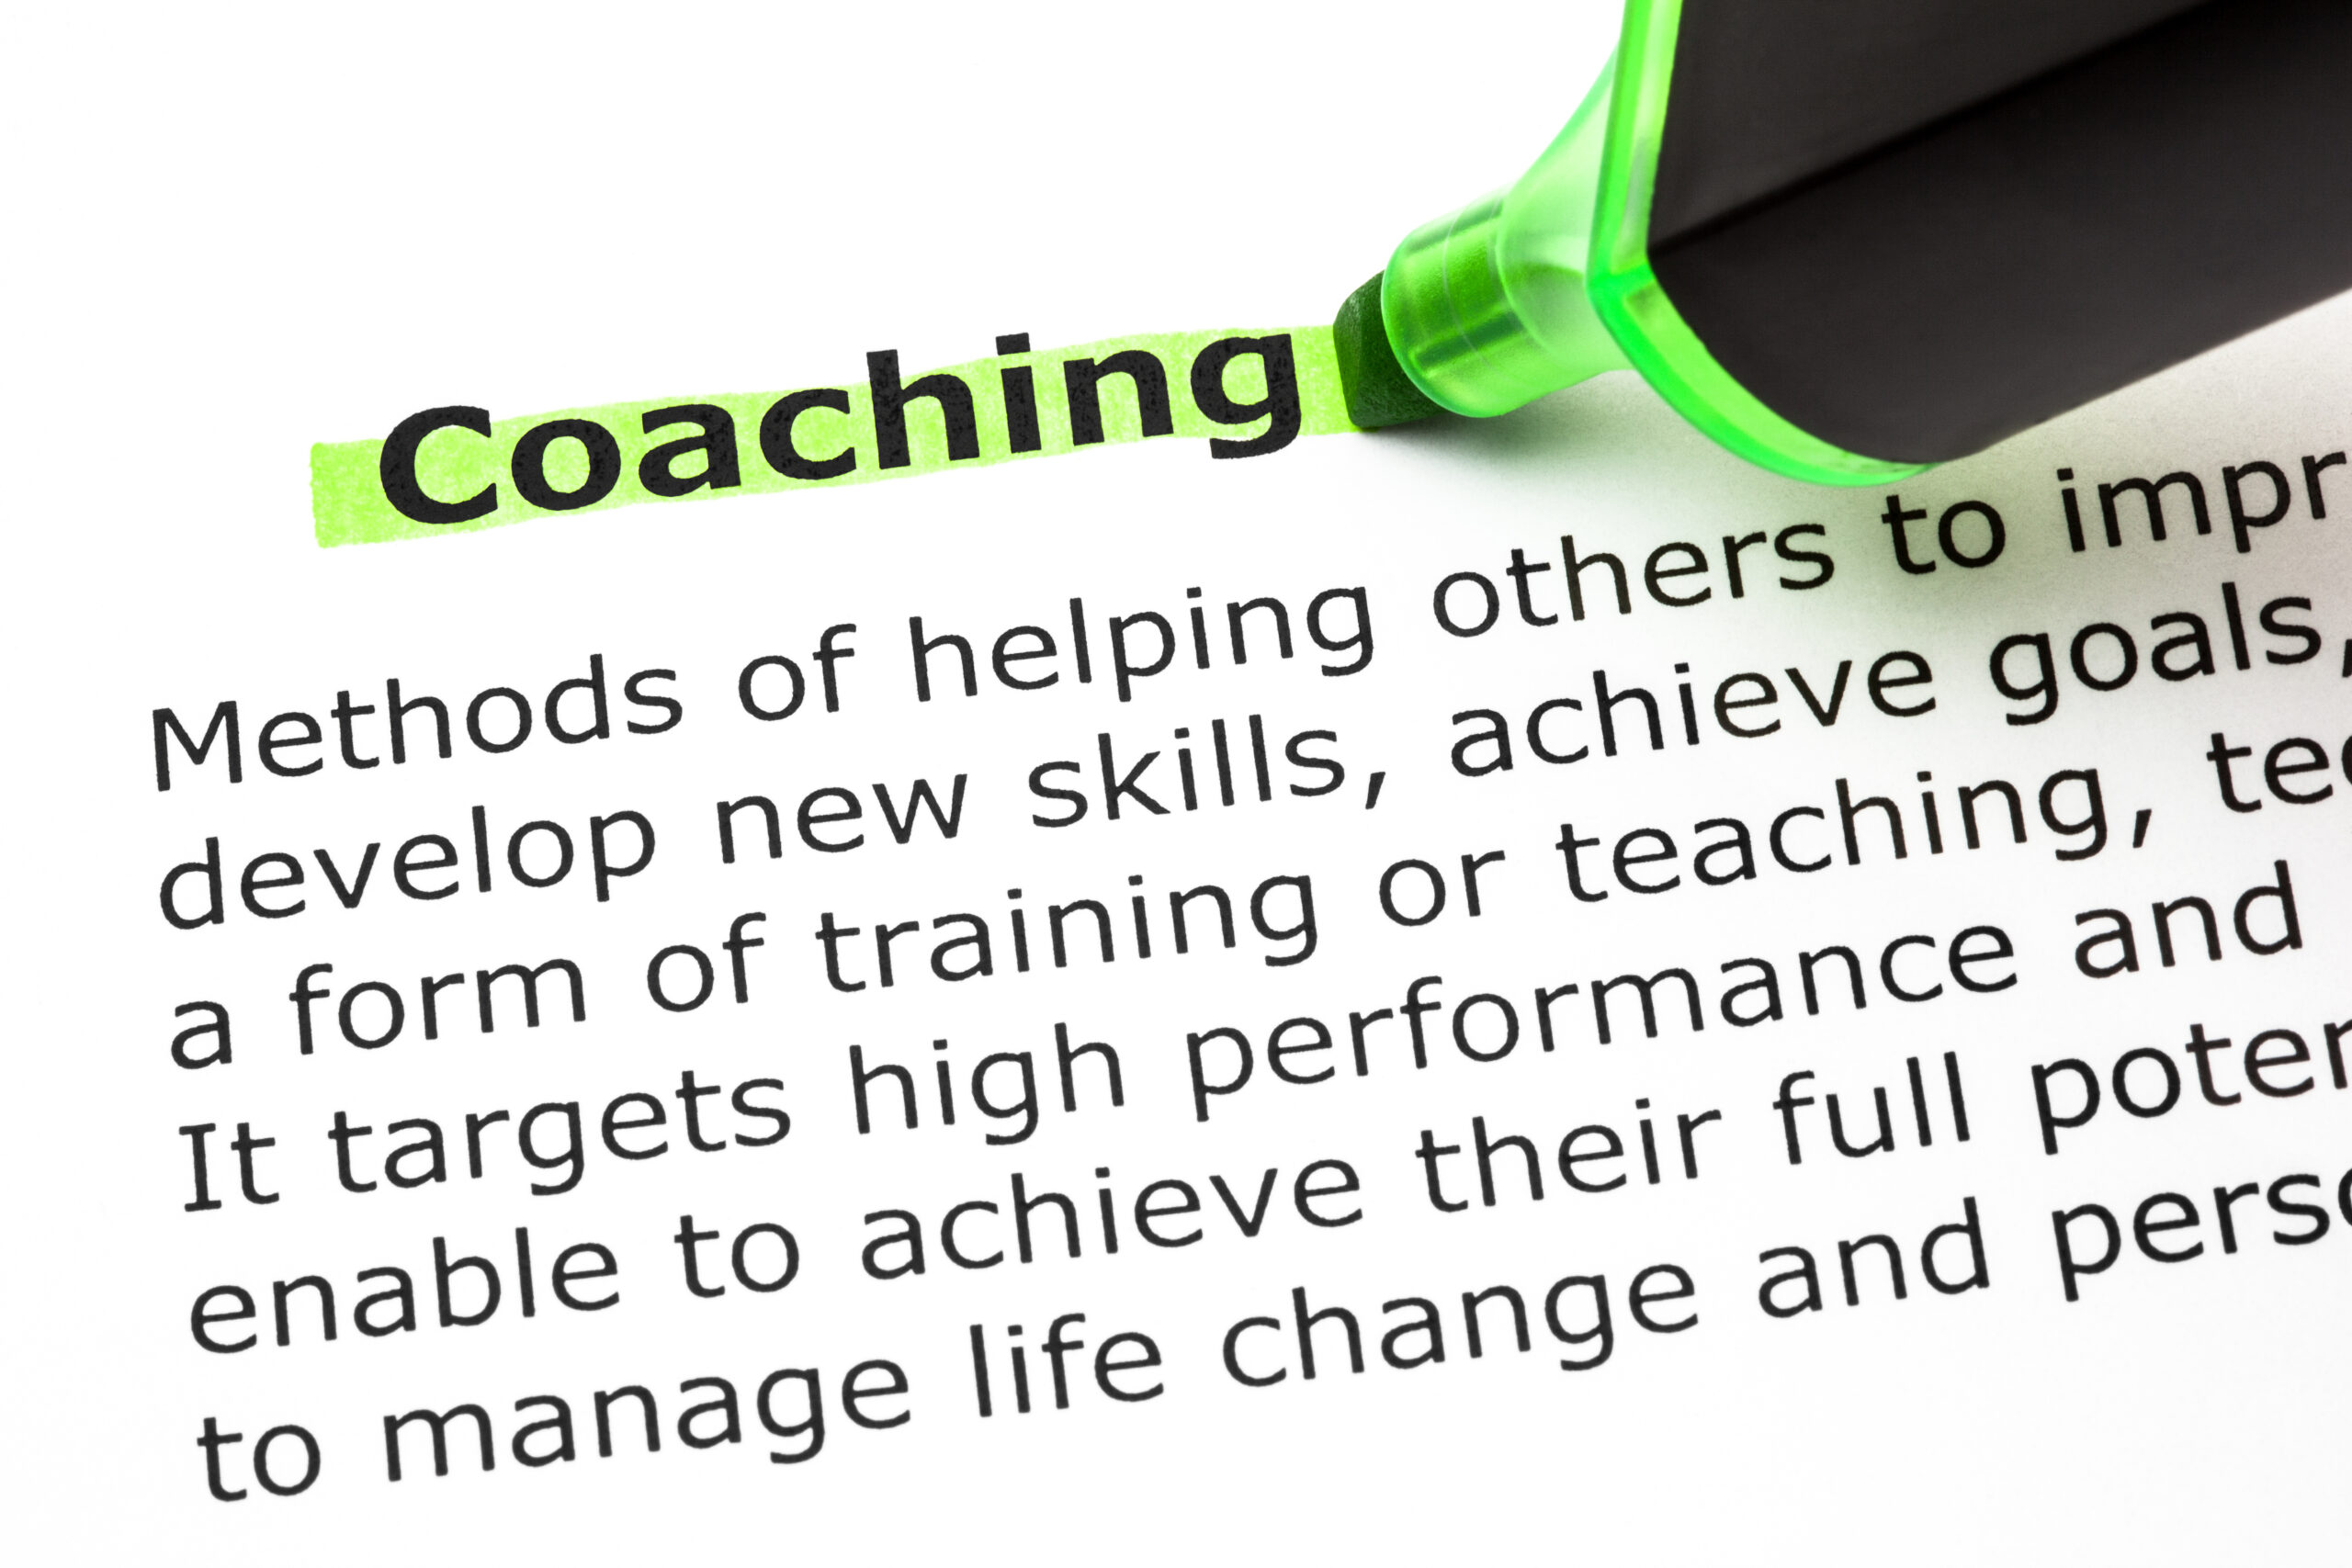 coaching benefits to transform people and achieve goals